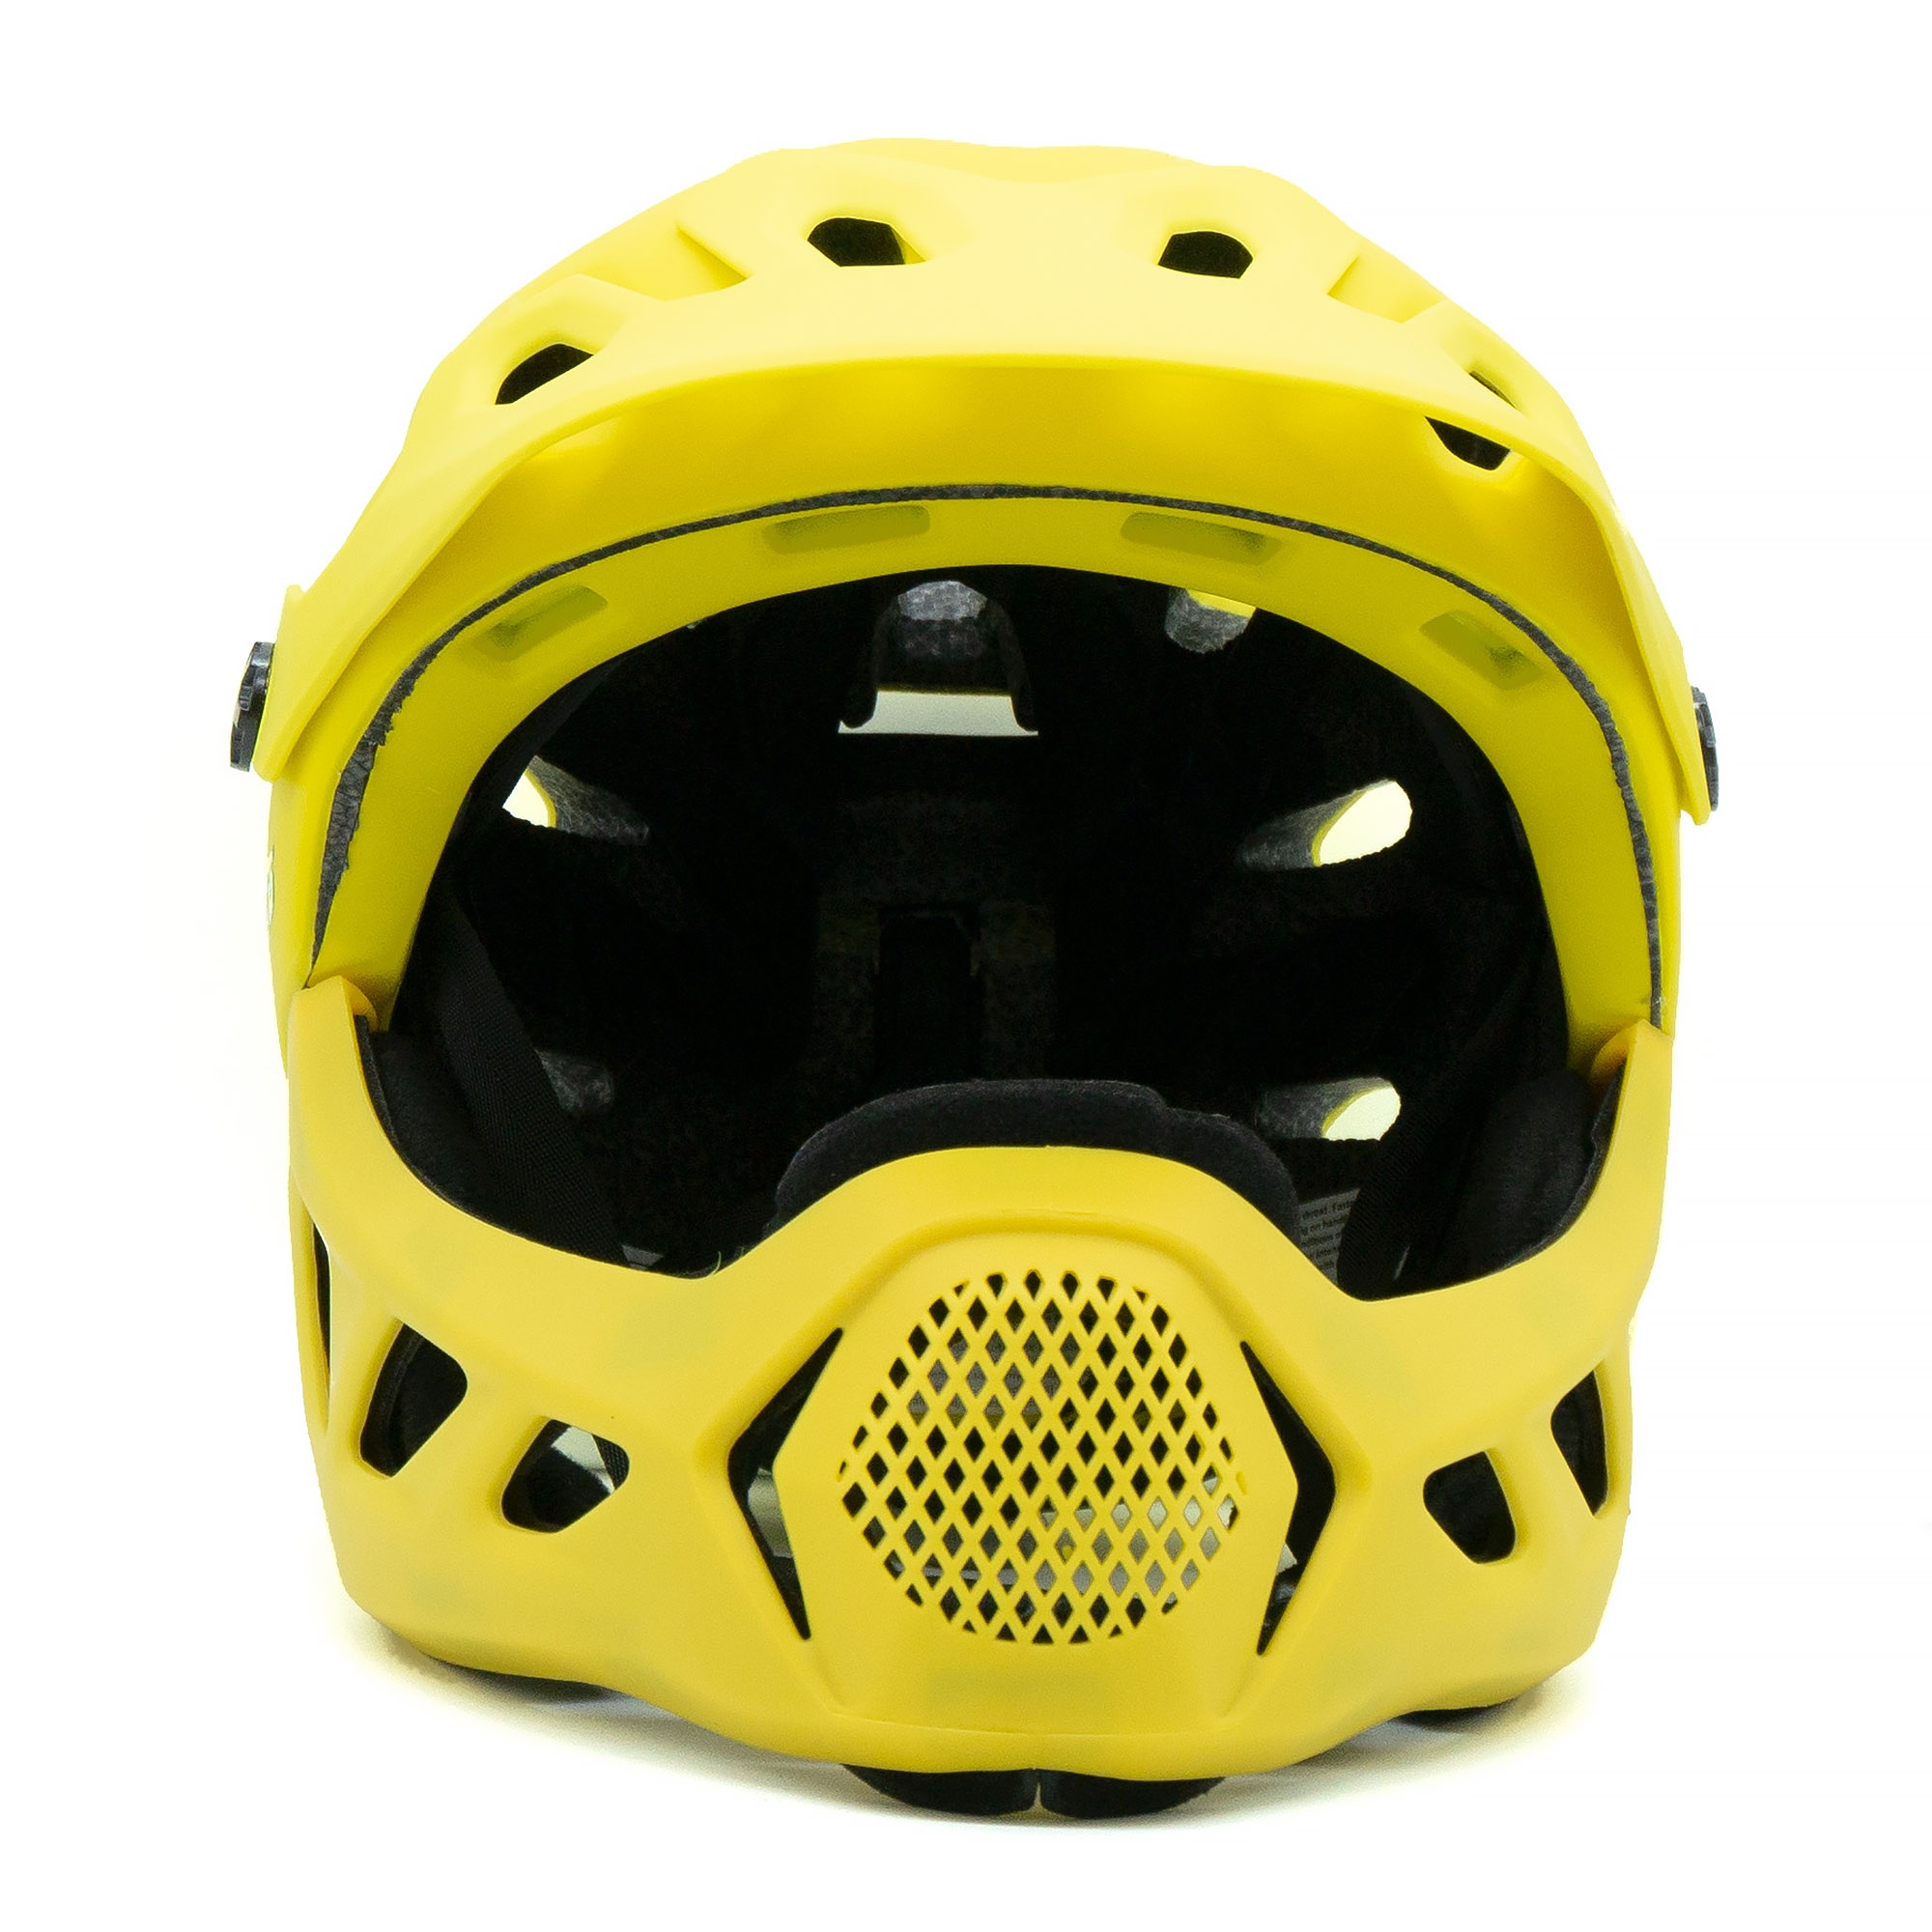 Kask rowerowy FULL FACE...